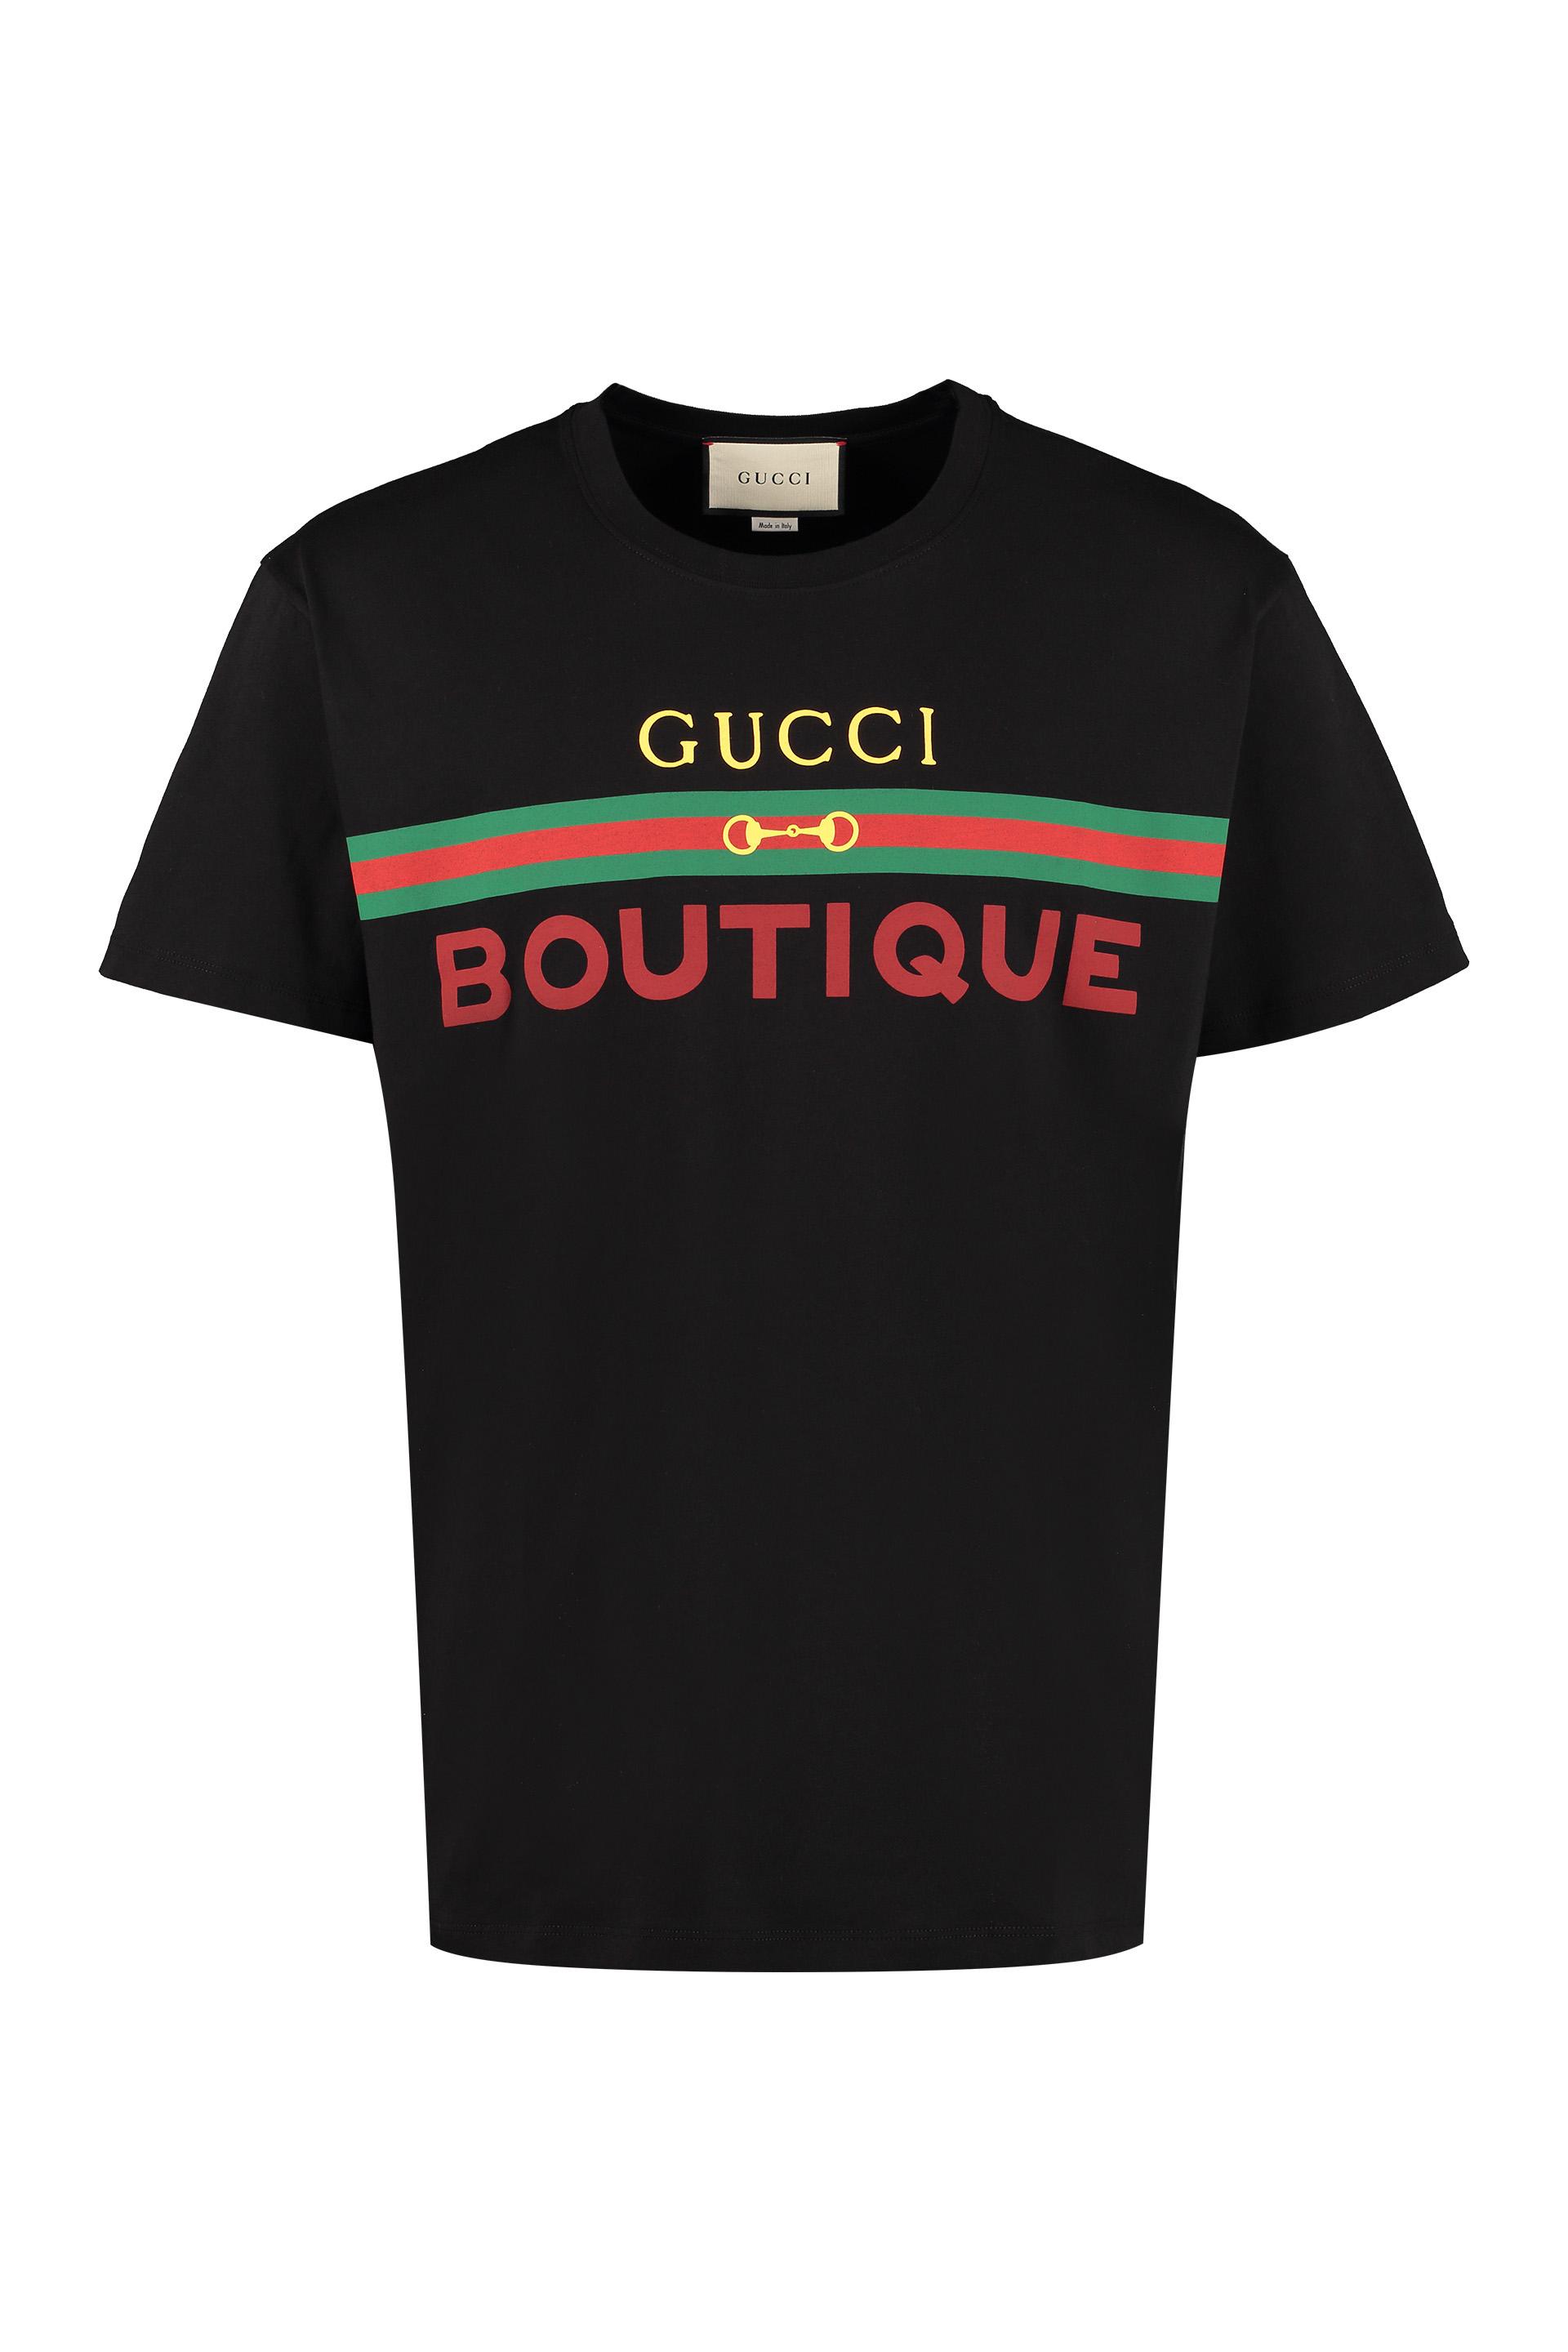 Gucci Cotton Printed Oversize T-shirt in Black for Men - Lyst